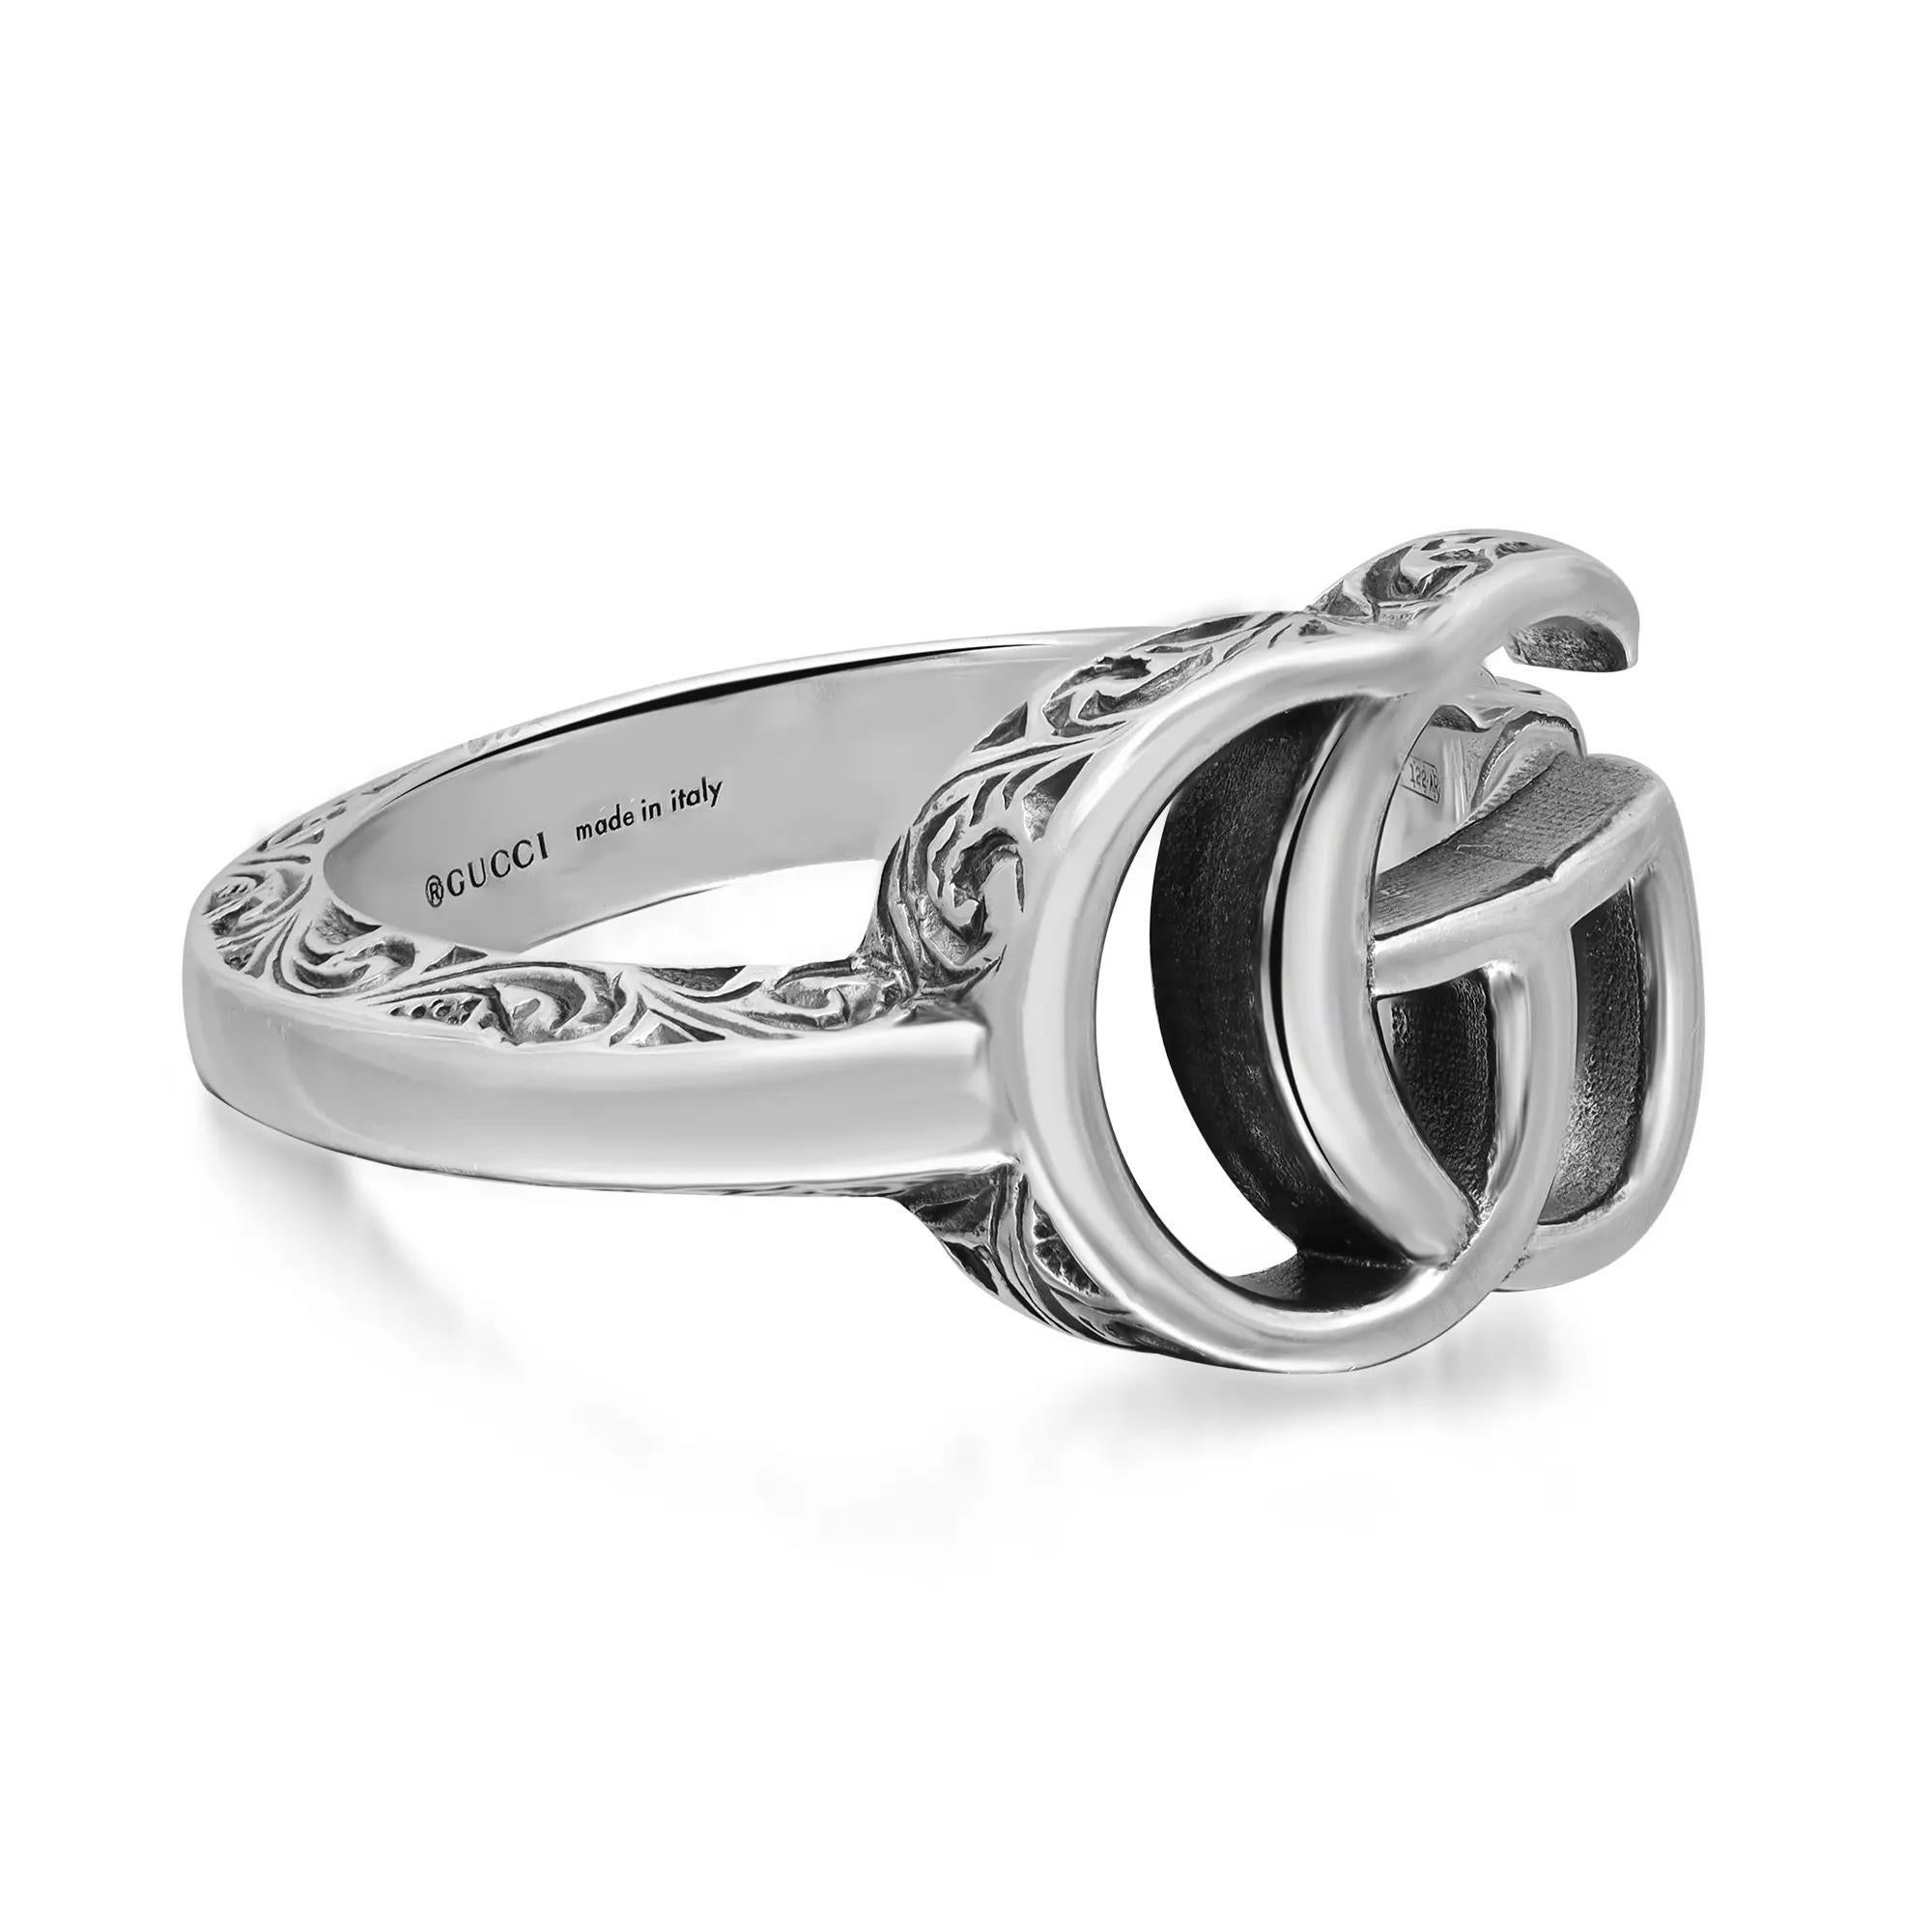 Gucci GG Marmont open key ring featuring a Double G symbol that sits atop a key which is formed into a ring. Crafted in 925 sterling silver with an aged finish and engraved edges. Ring size 7. Band width: 3.4 mm. Double G size: 11mm x 13mm. Total